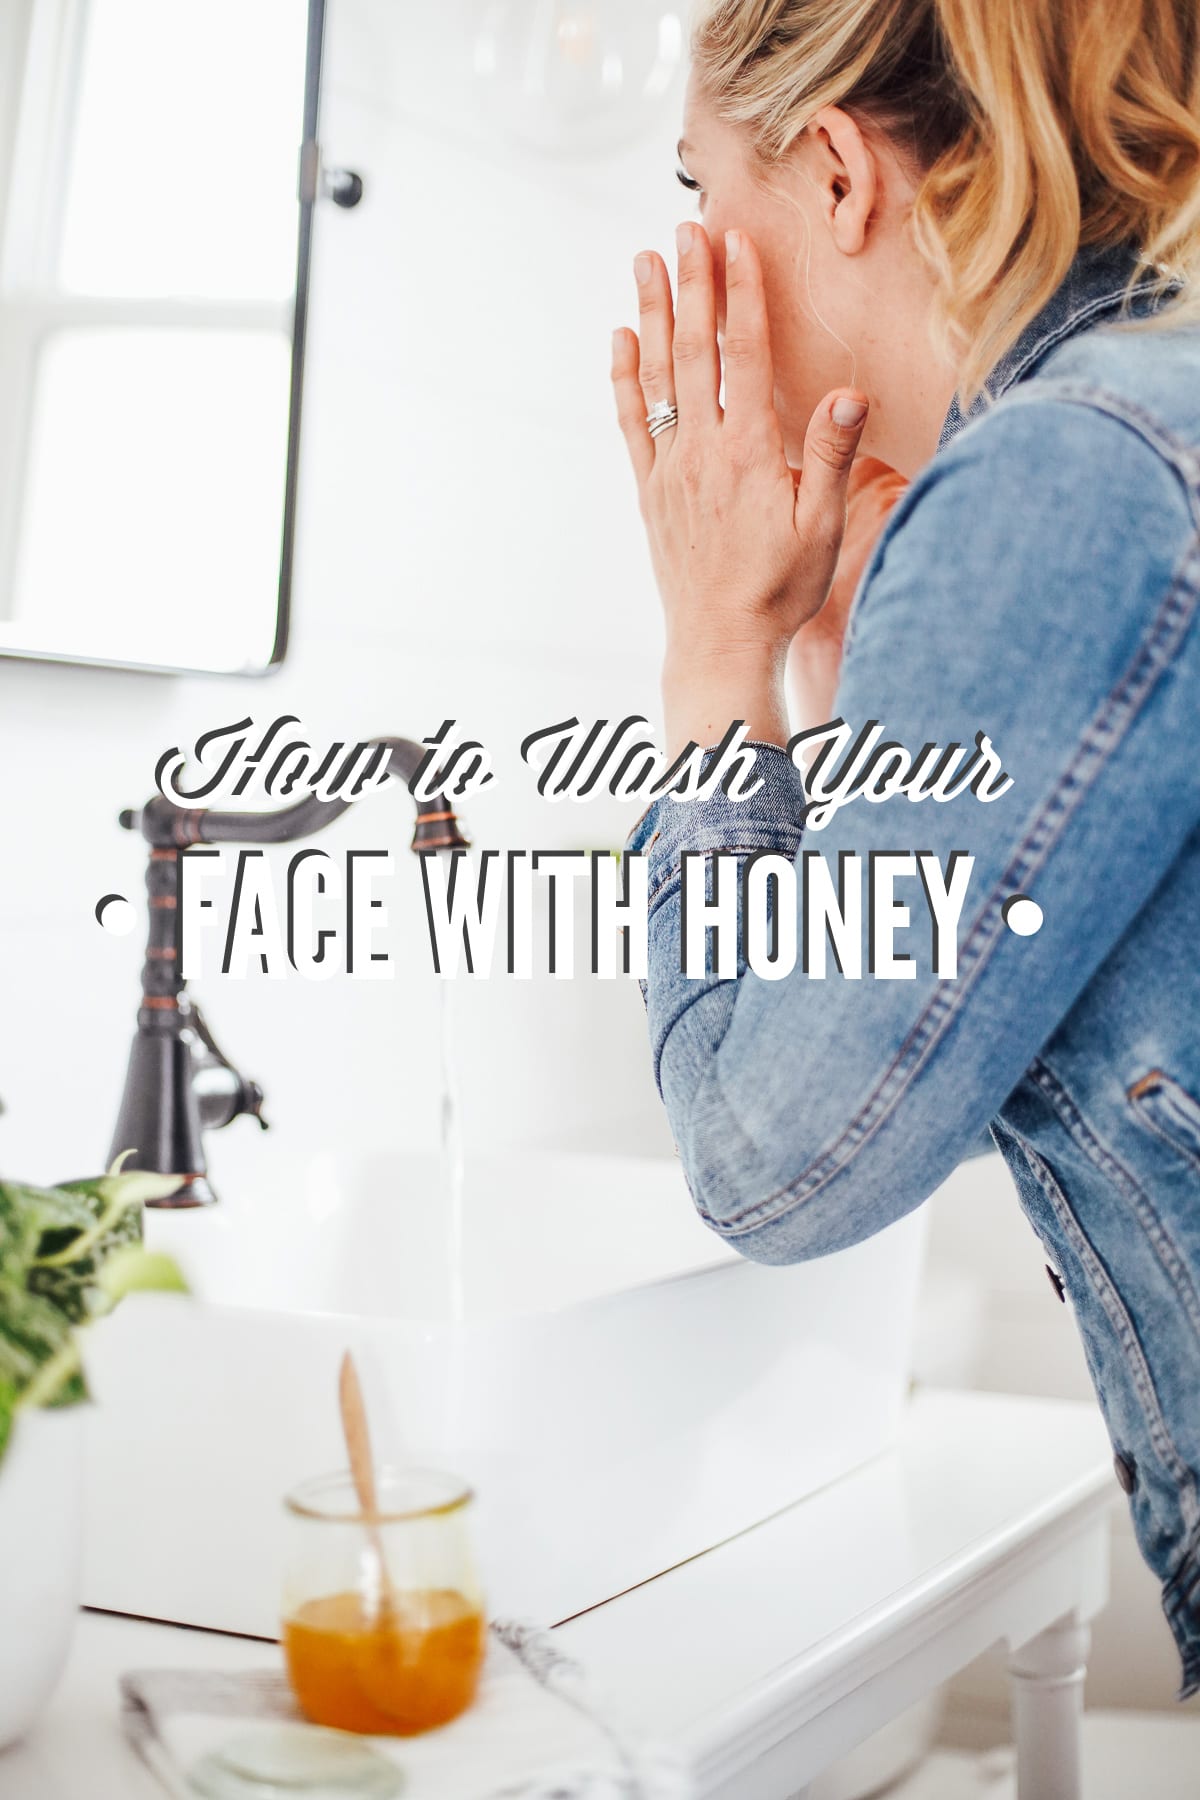 How to Wash Your Face with Honey